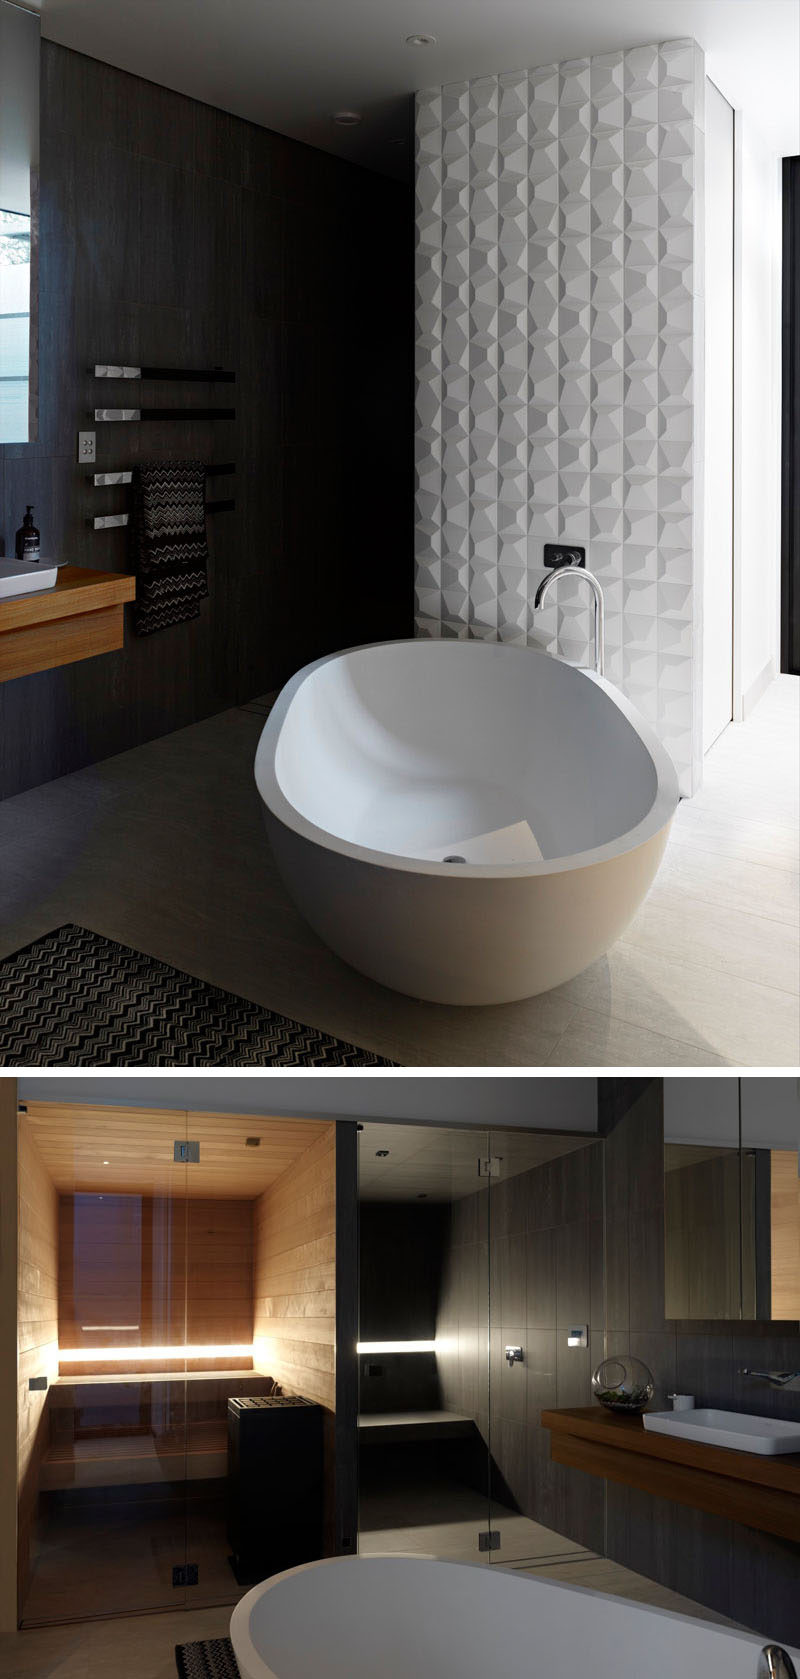 This modern bathroom features decorative 3-dimensional tile wall, a standalone bathtub, a shower with built-in seat and a sauna.